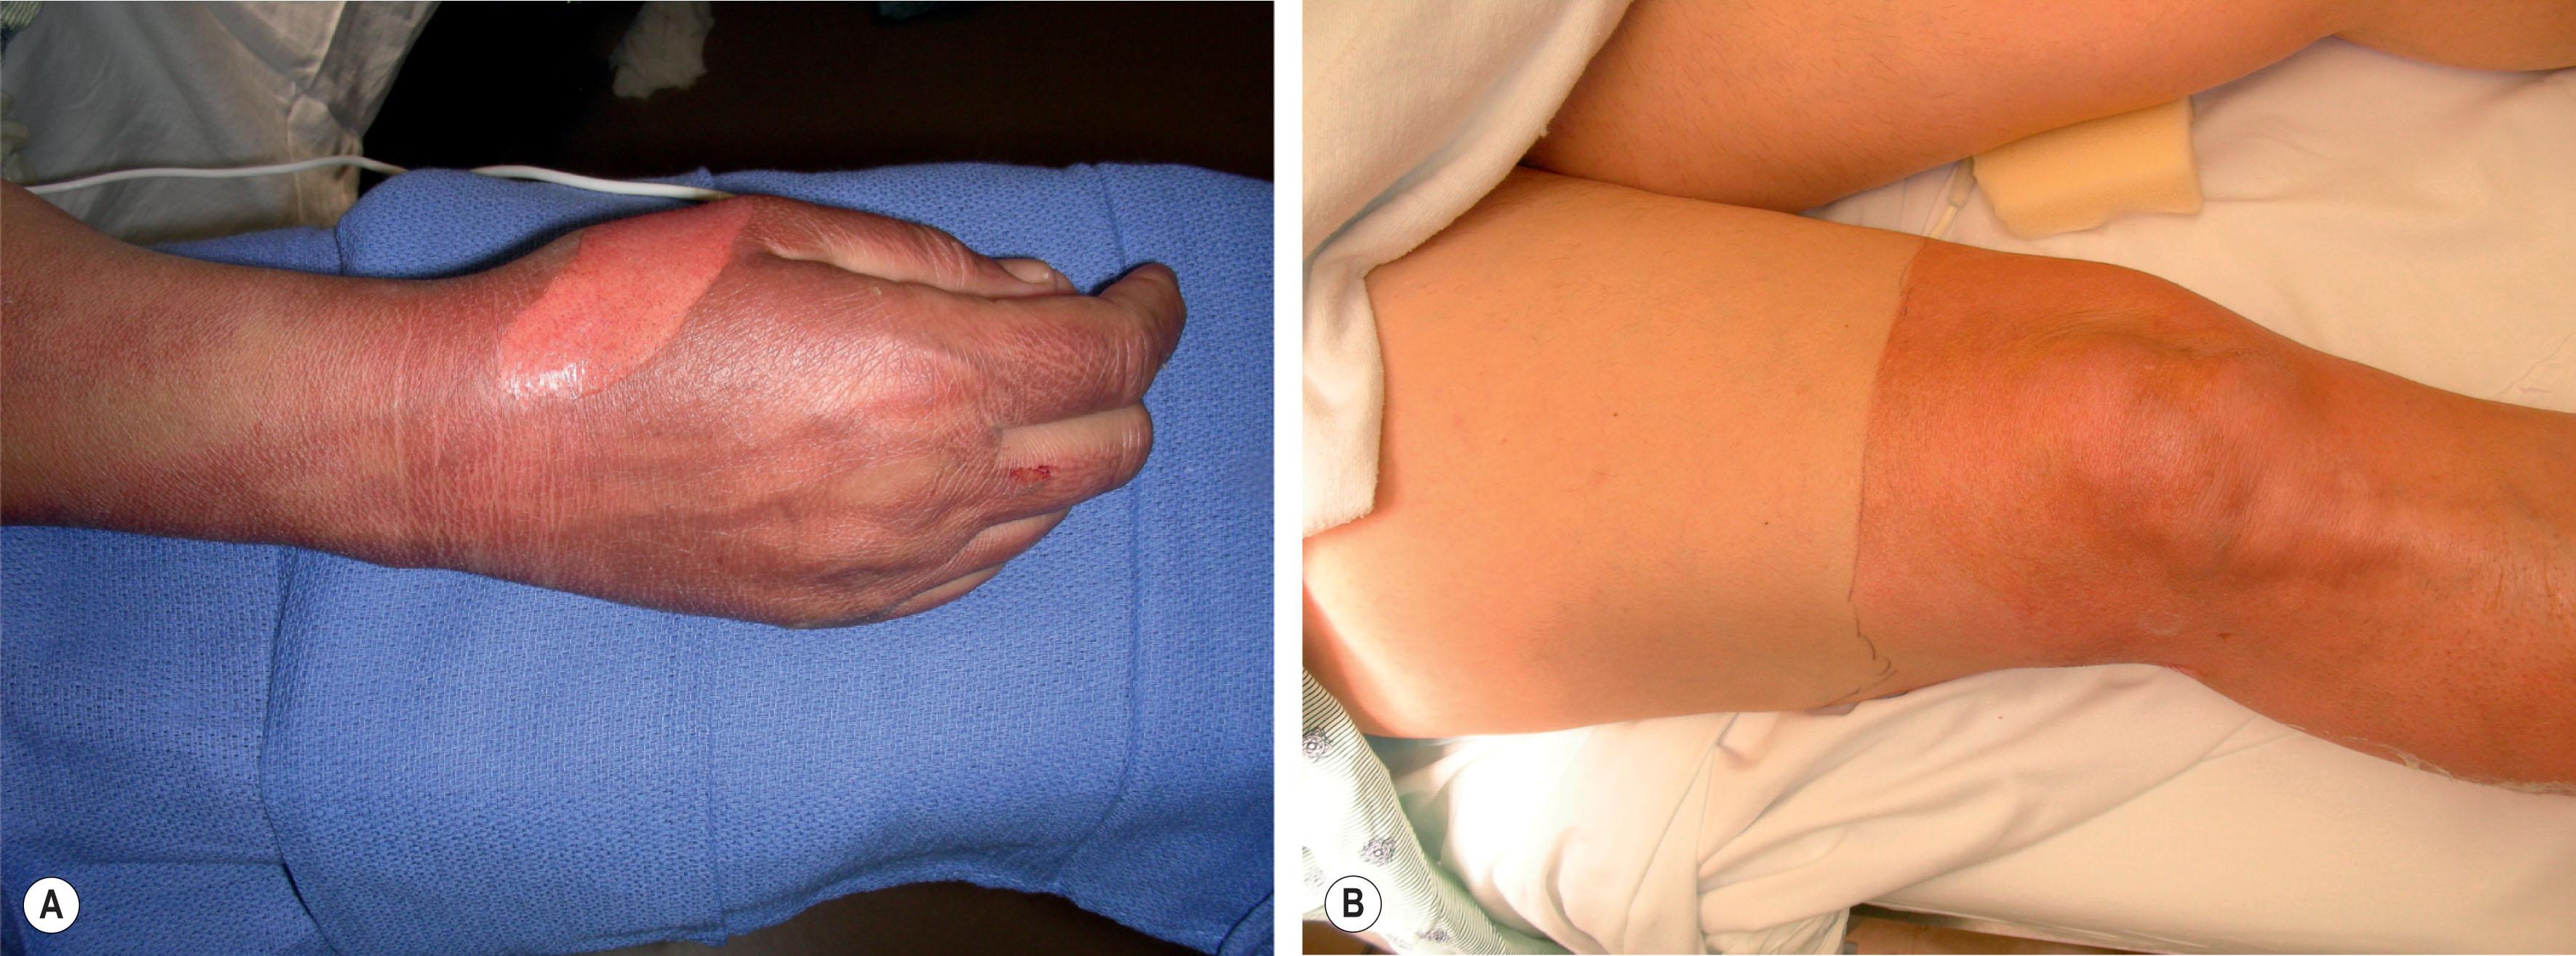 Figure 18.3, Typical appearance of superficial skin burns from (A) low energy electrical arc flash and (B) sunburn.